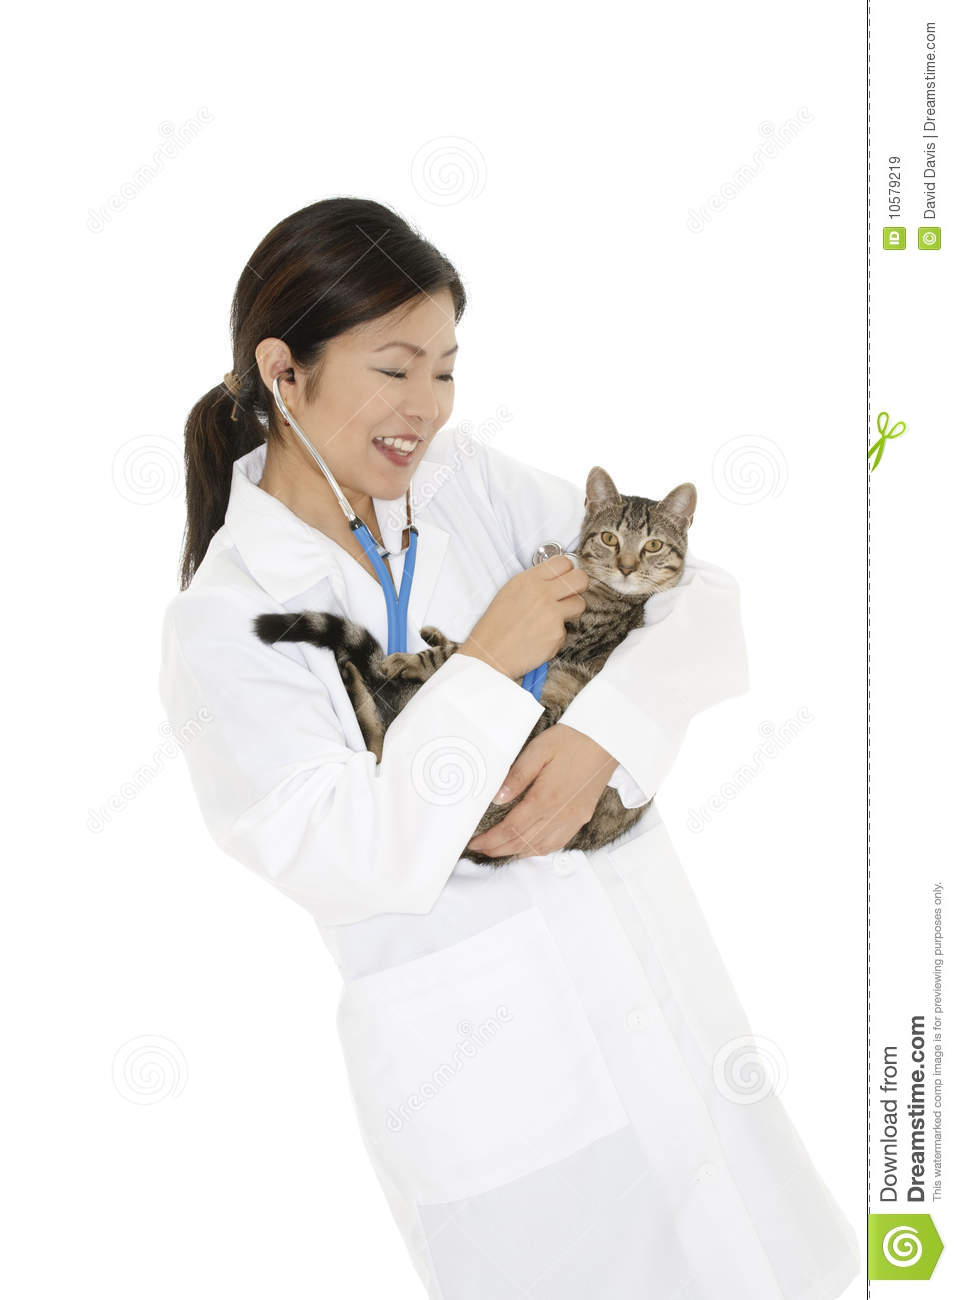 Veterinarian Royalty Free Stock Images   Image  10579219